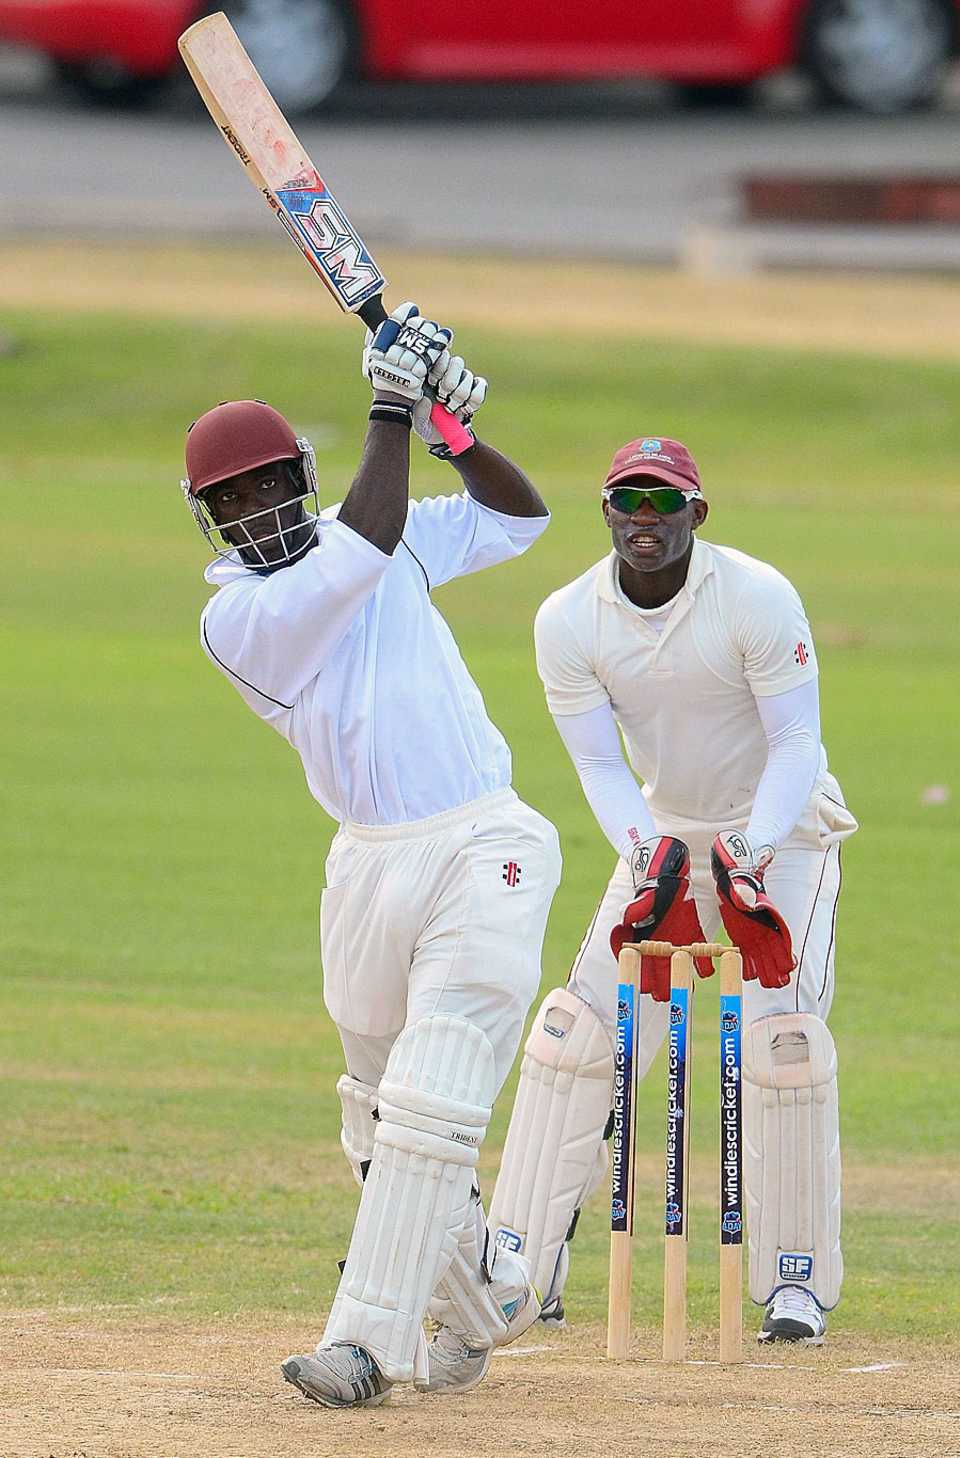 Chadwick Walton scored an unbeaten century for Combined Campuses and Colleges in the second innings